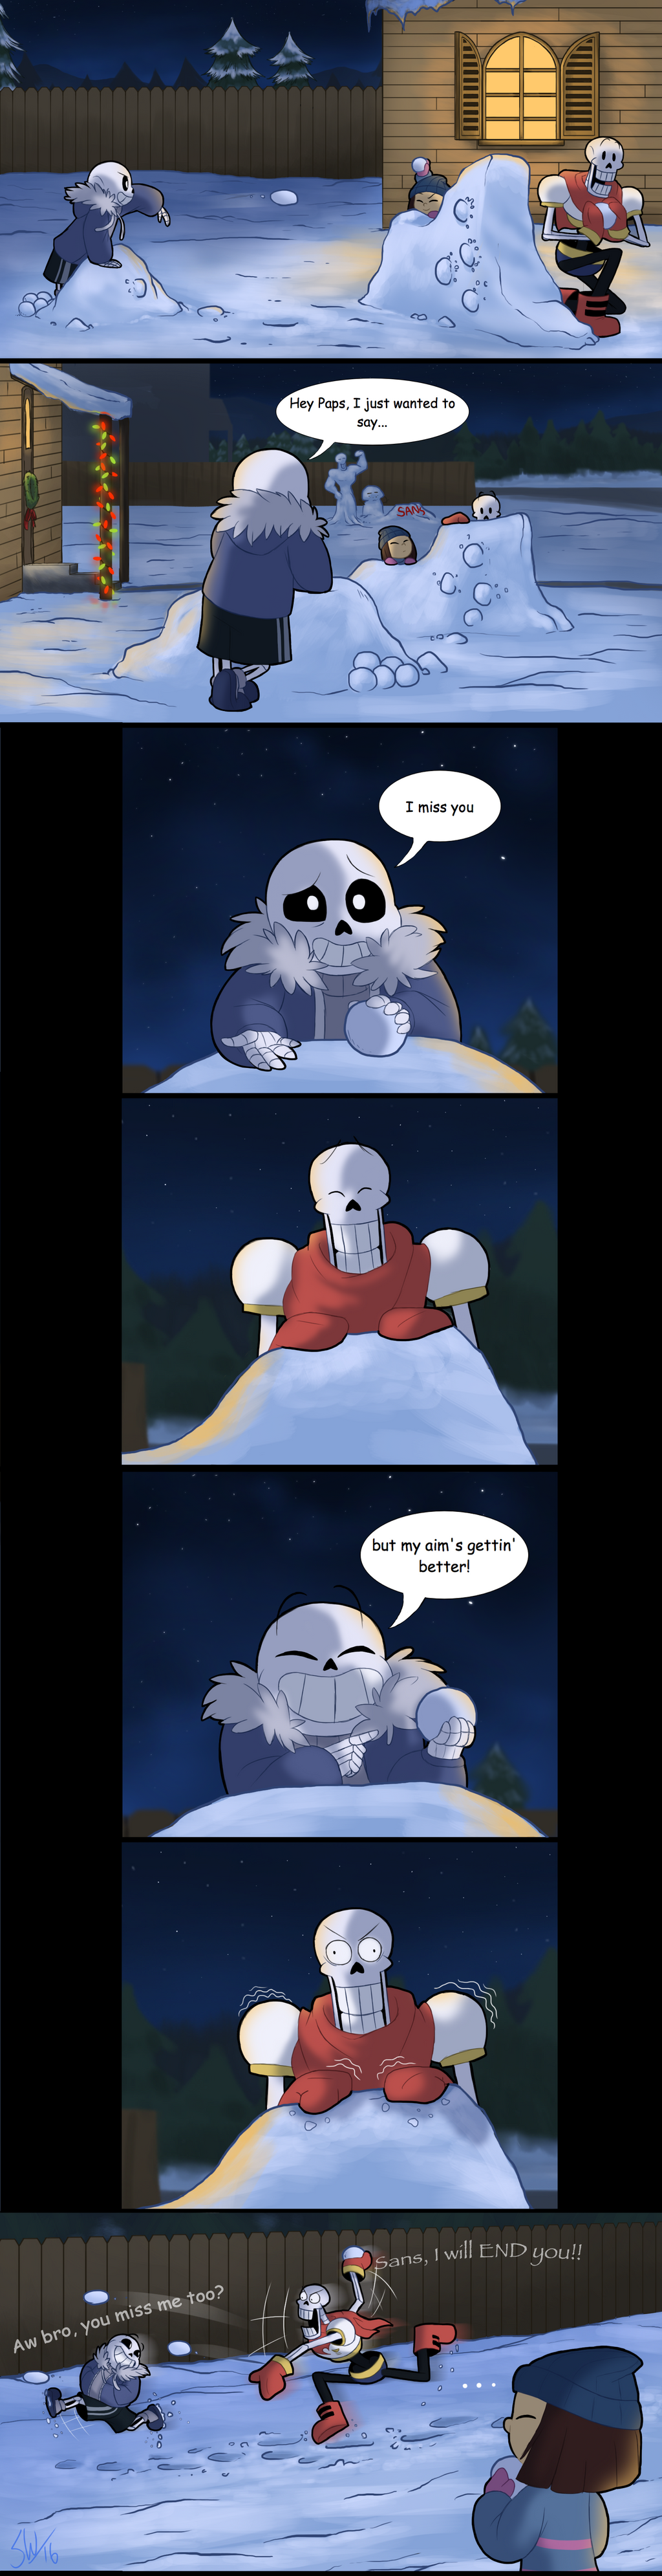 Comic Dubs- Undertale - I Miss You by TC-96 - YouTube